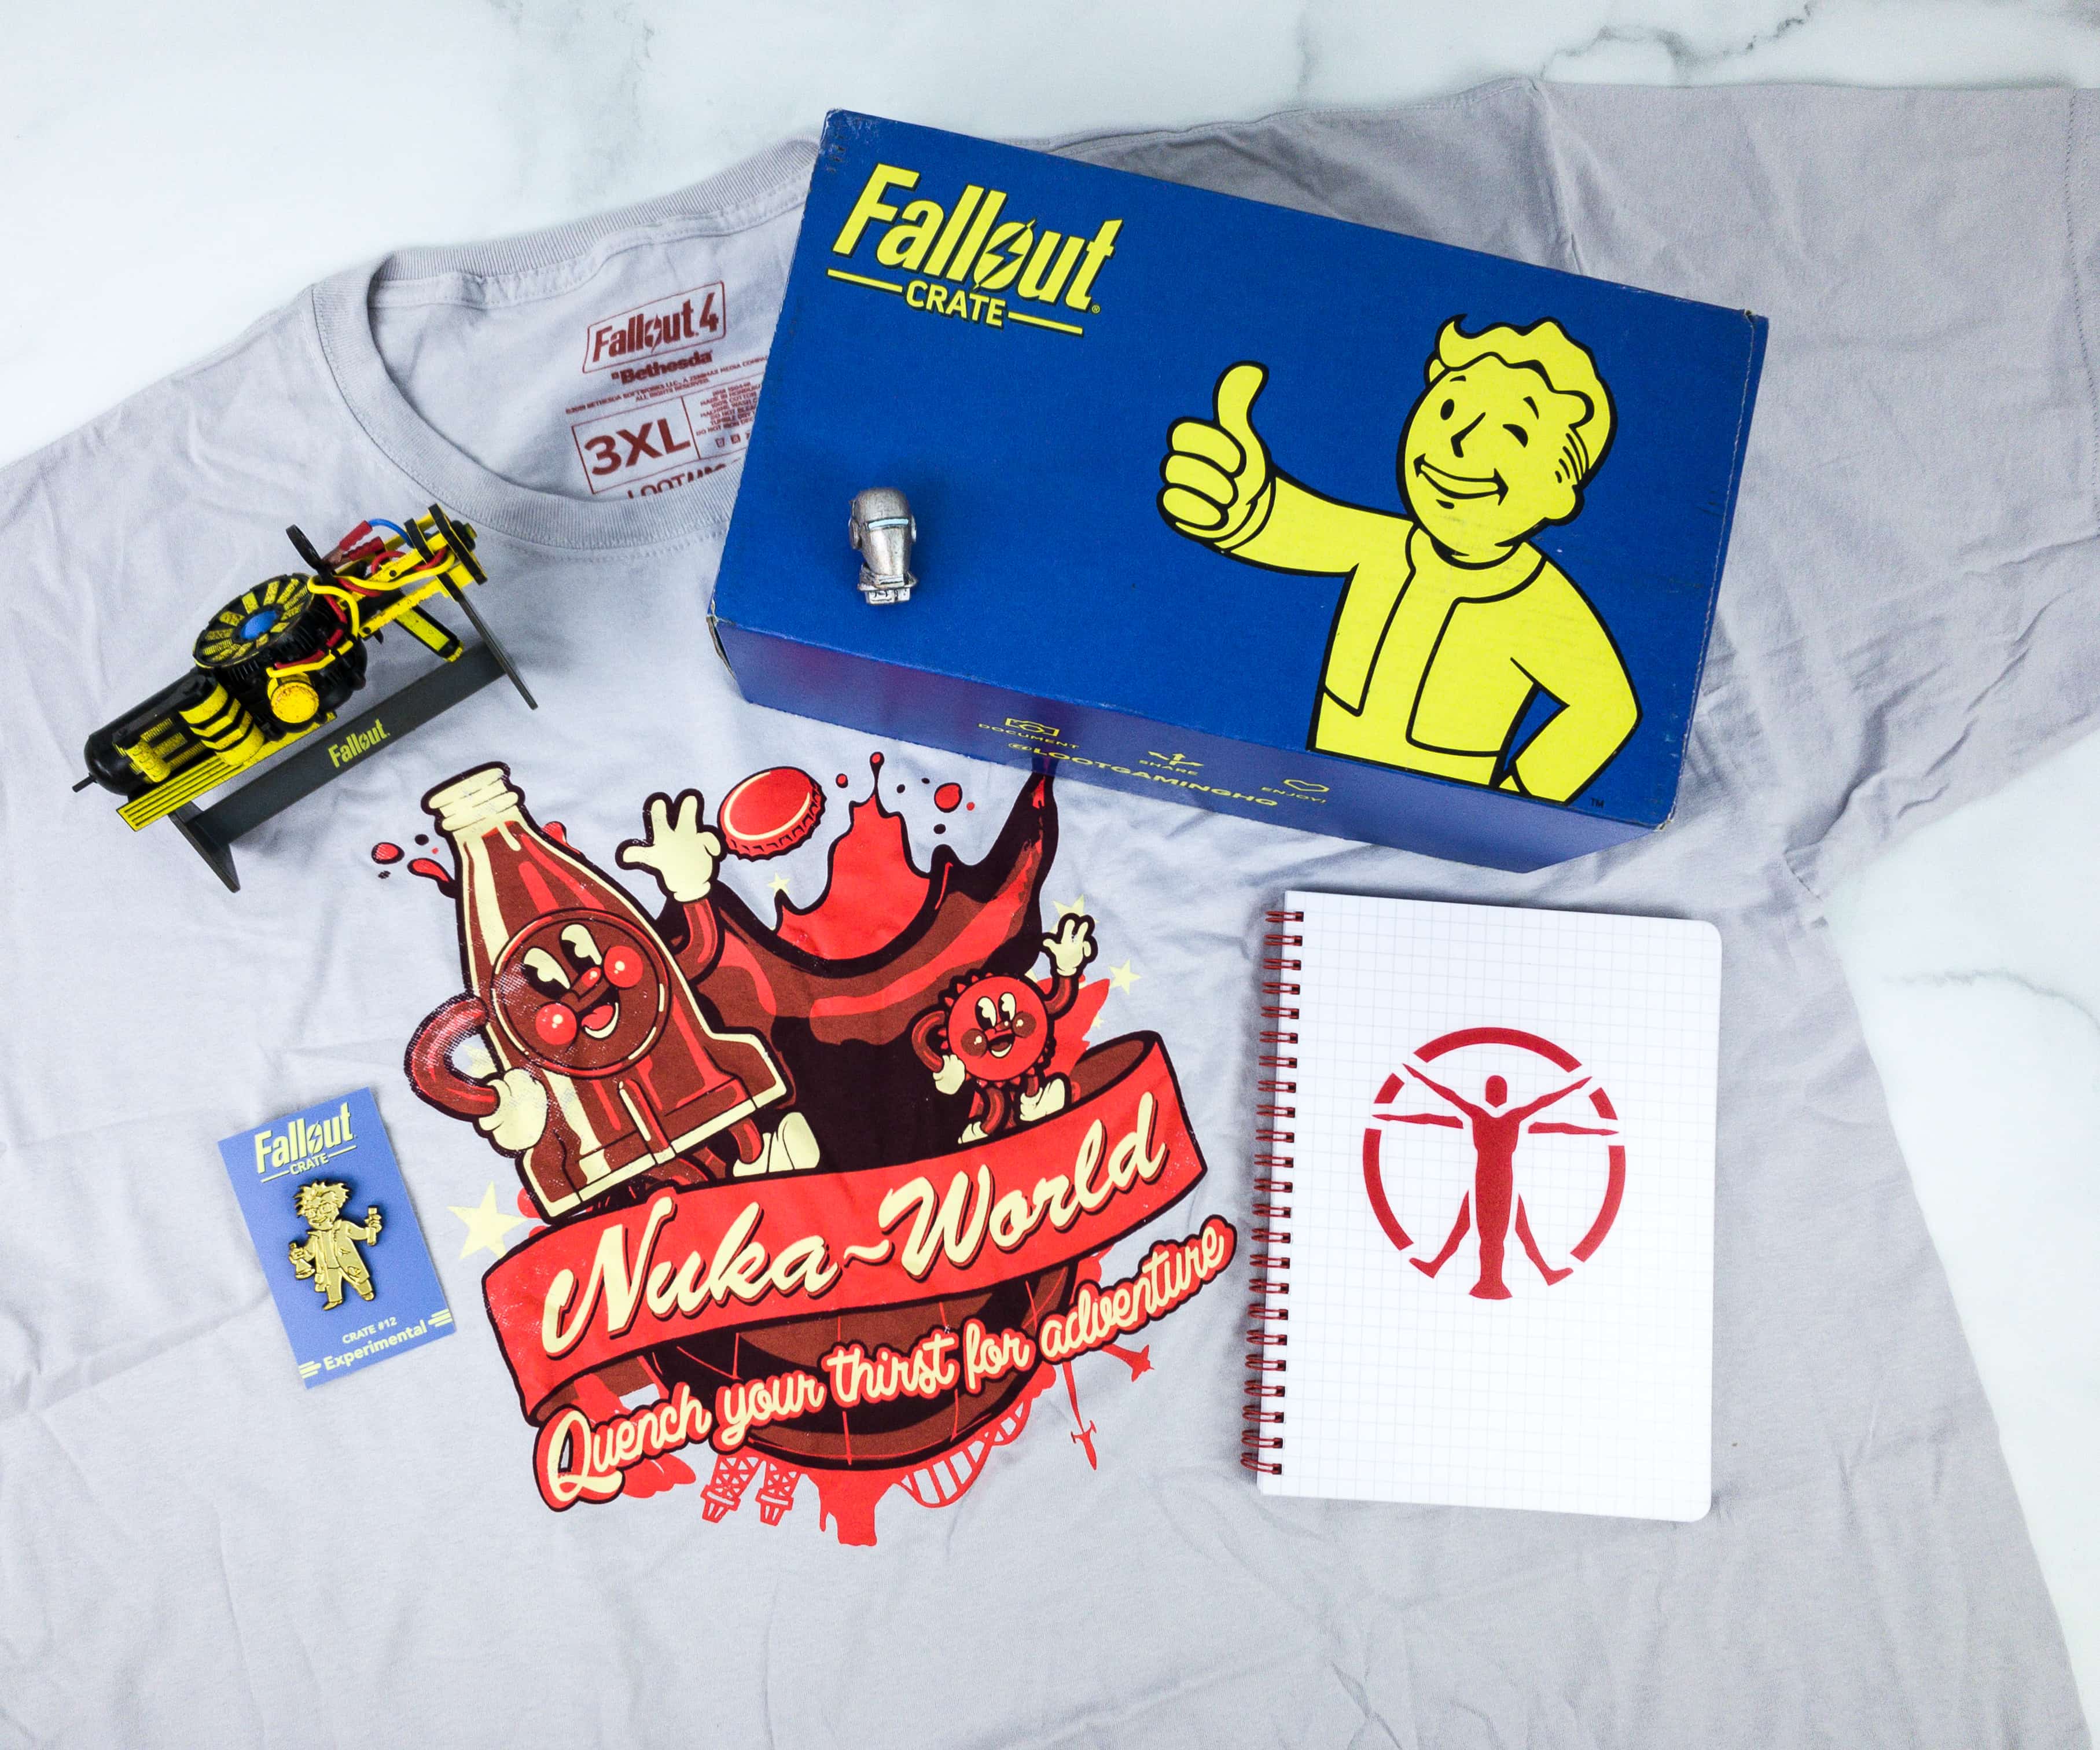 Loot Crate Review! Two Years Later - Fallout Theme 